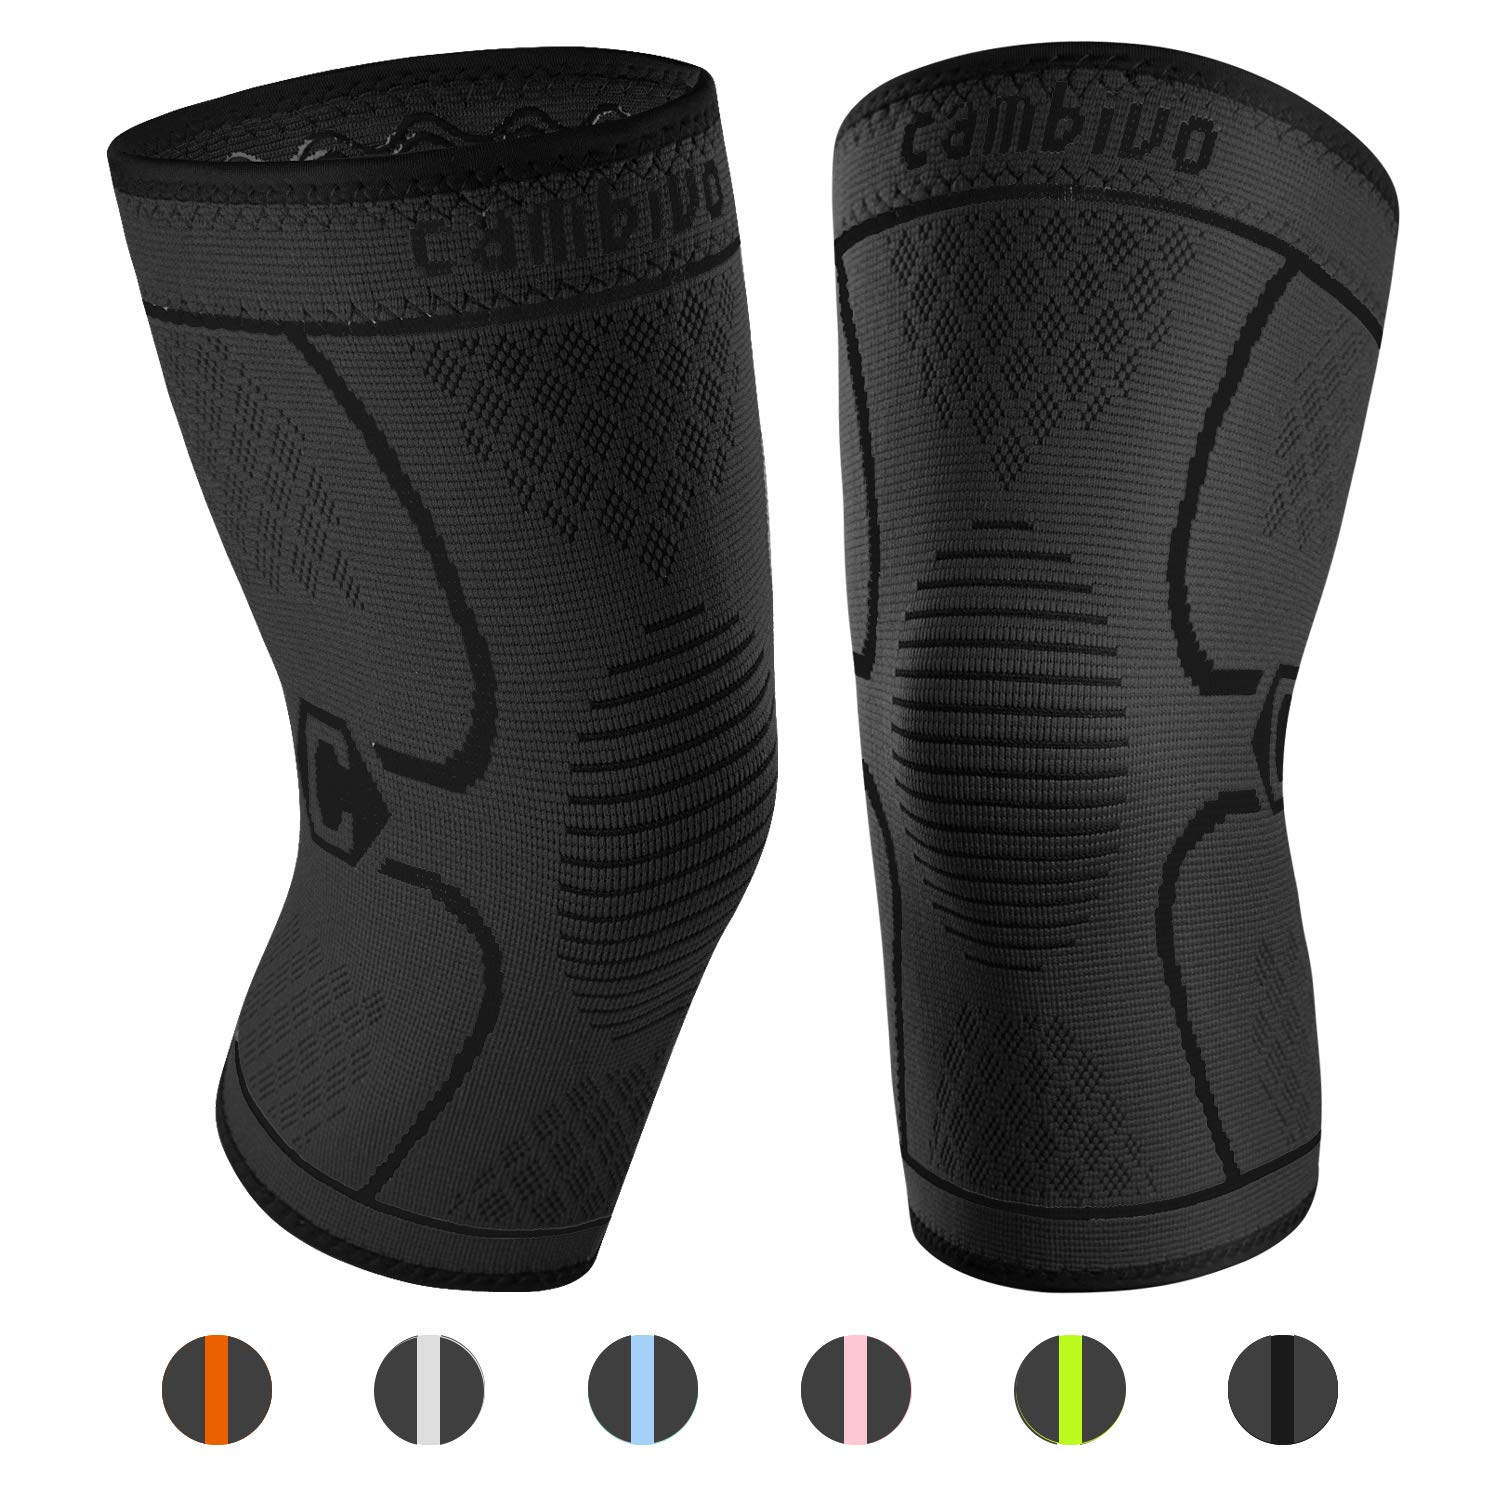 Cambivo 2 pack Knee Brace Review